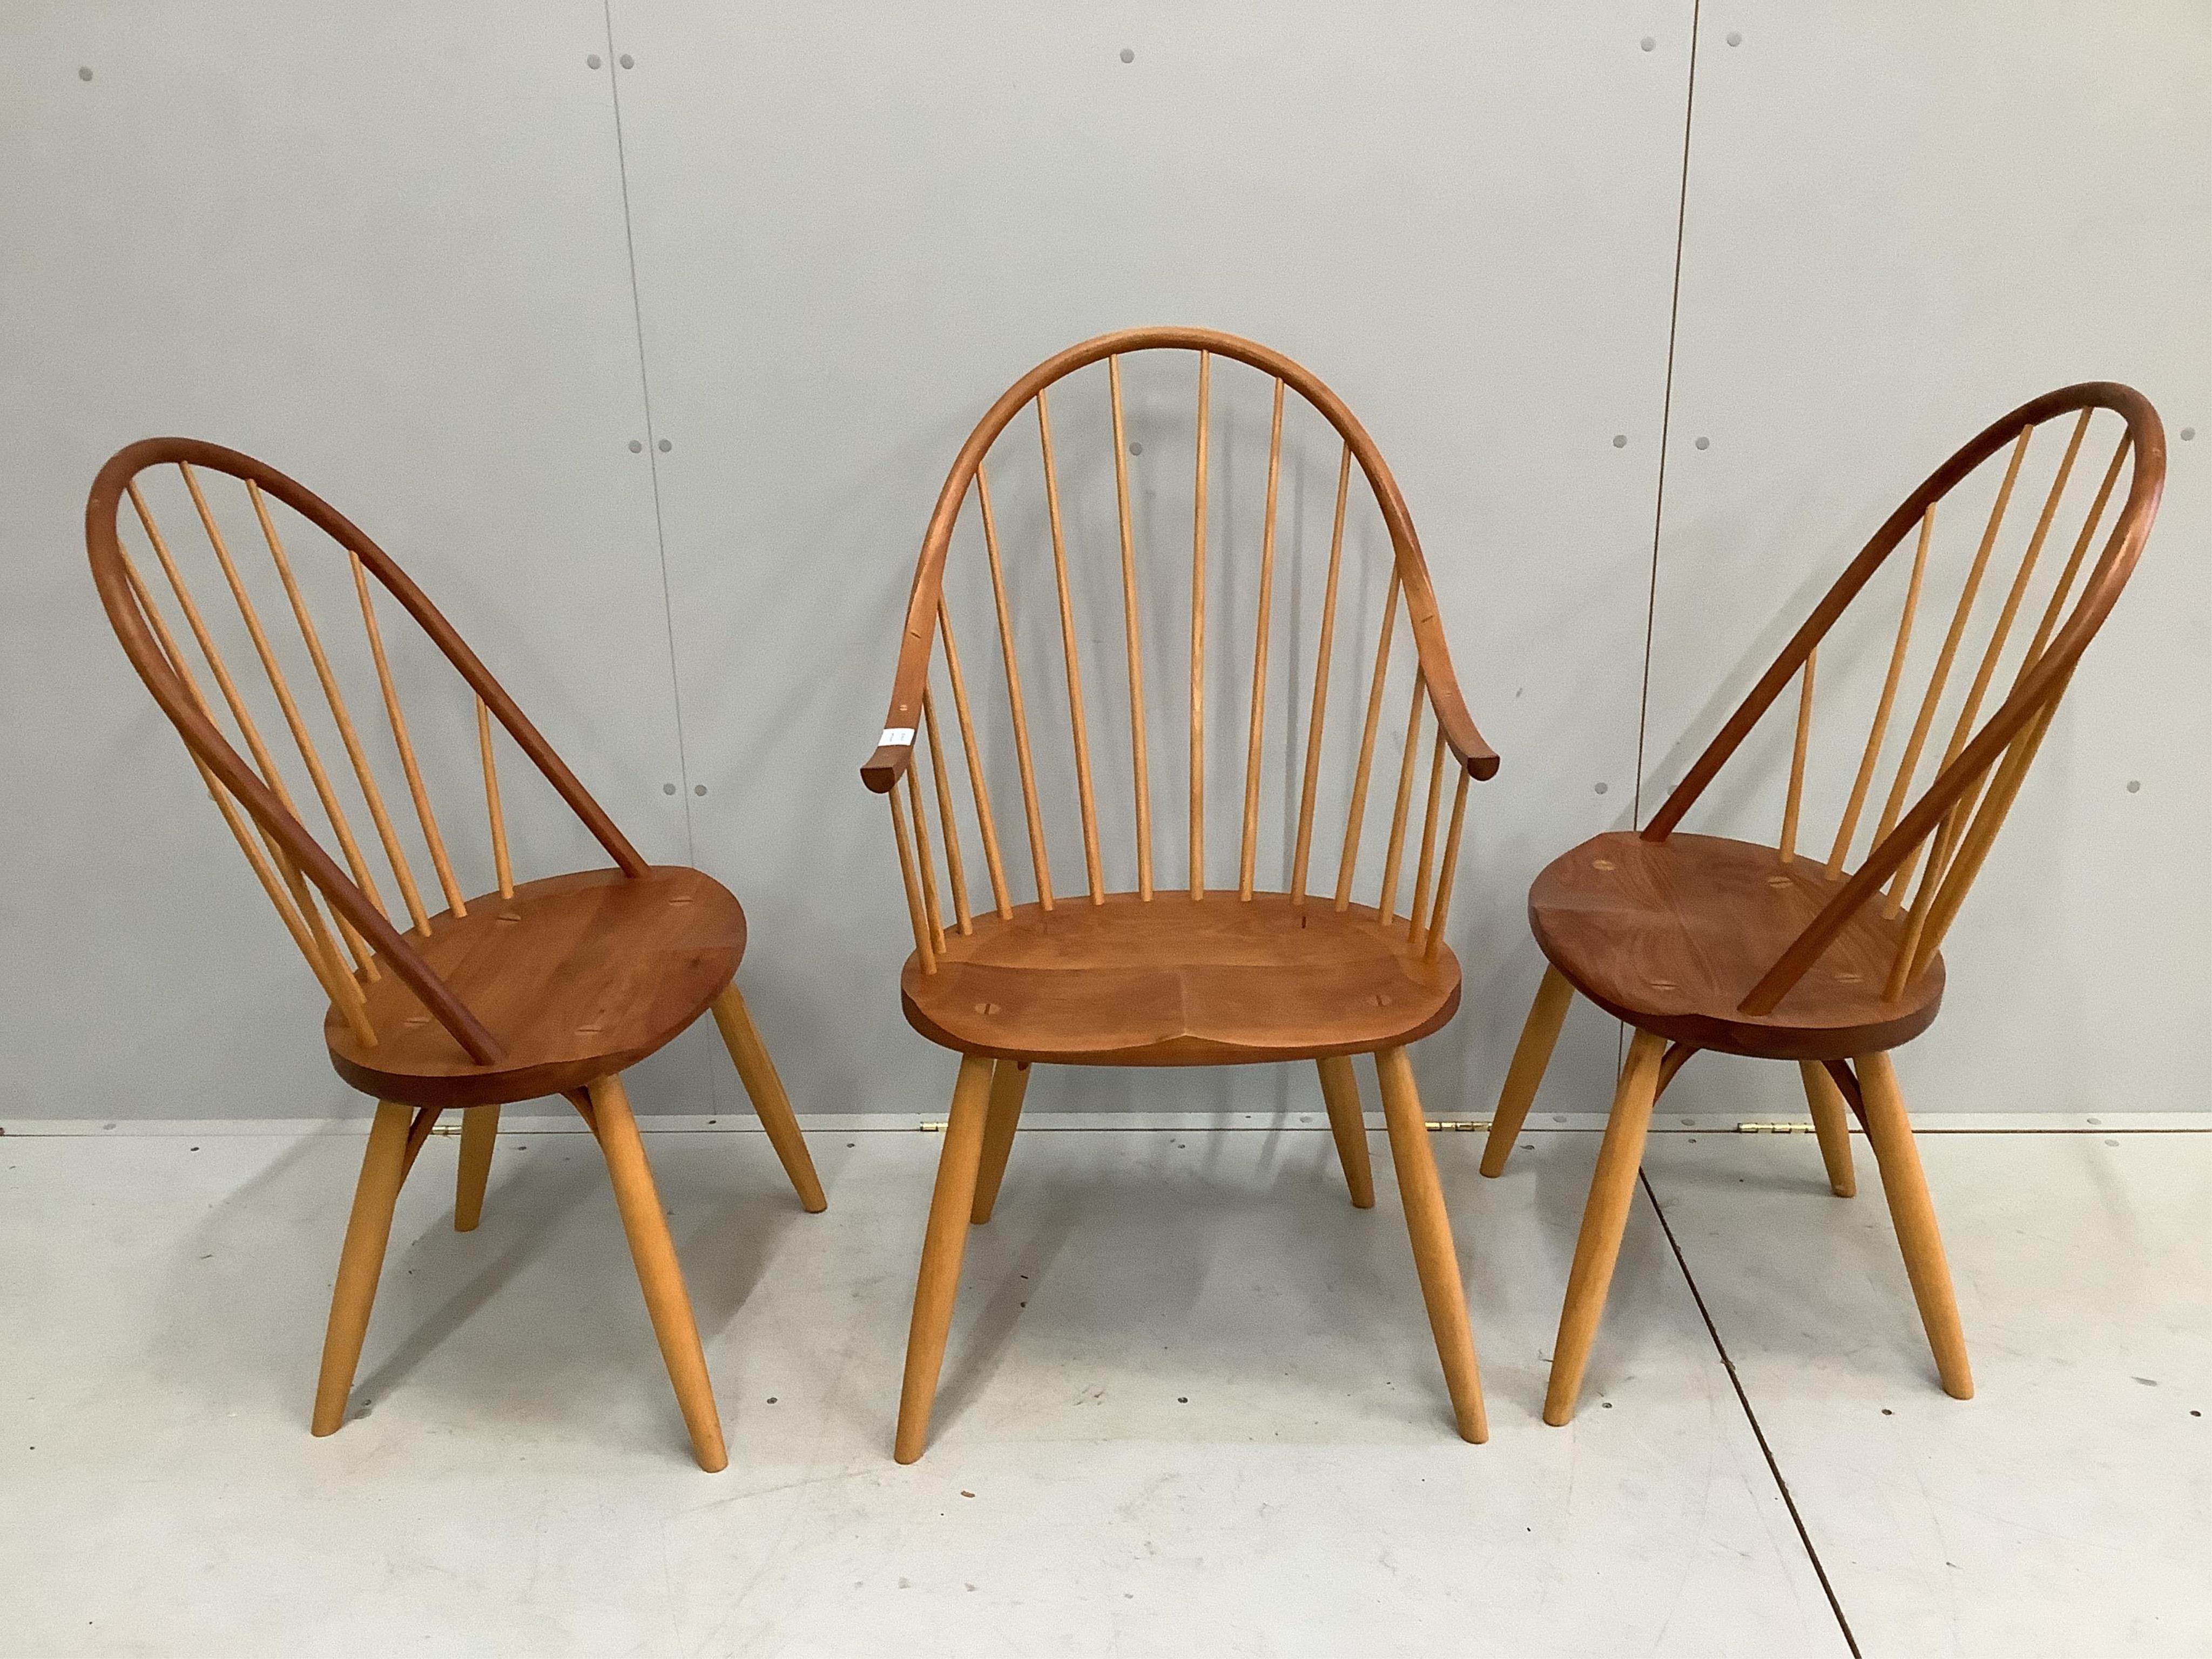 A Thomas Moser cherrywood hoop back armchair and two single chairs, largest width 59cm, depth 56cm, height 105cm. Condition - good